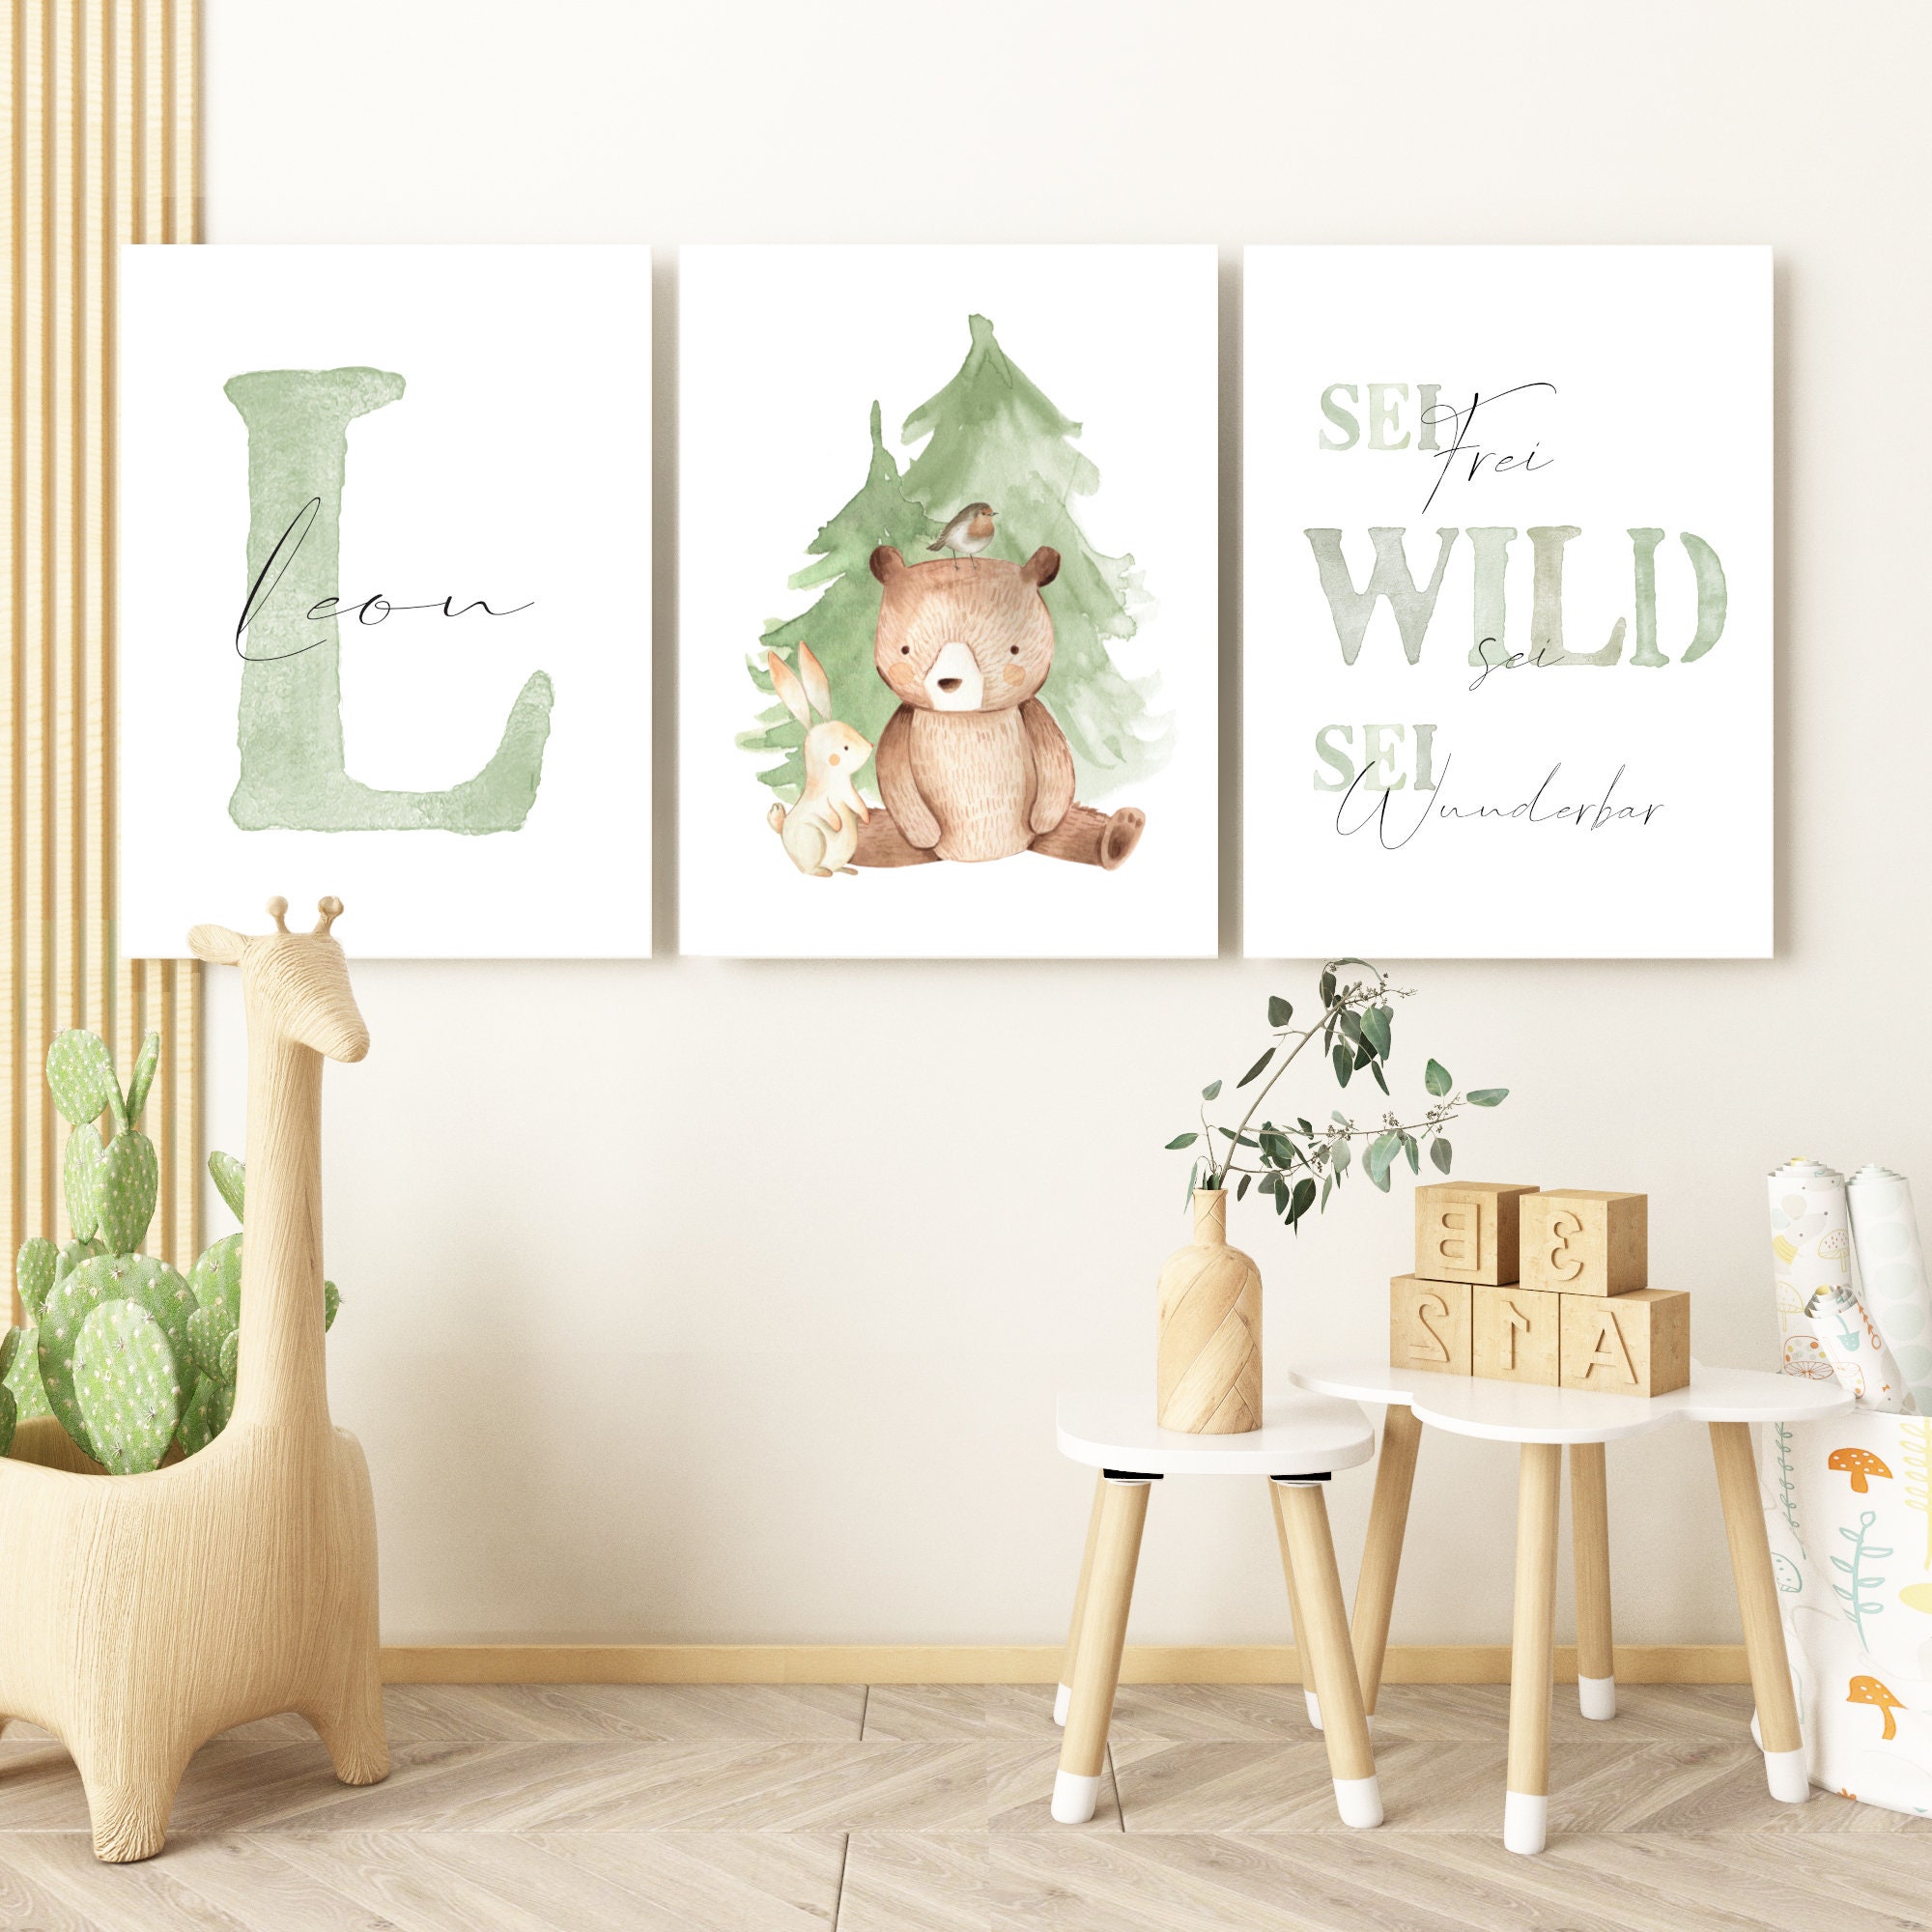 Kinderposter tiere